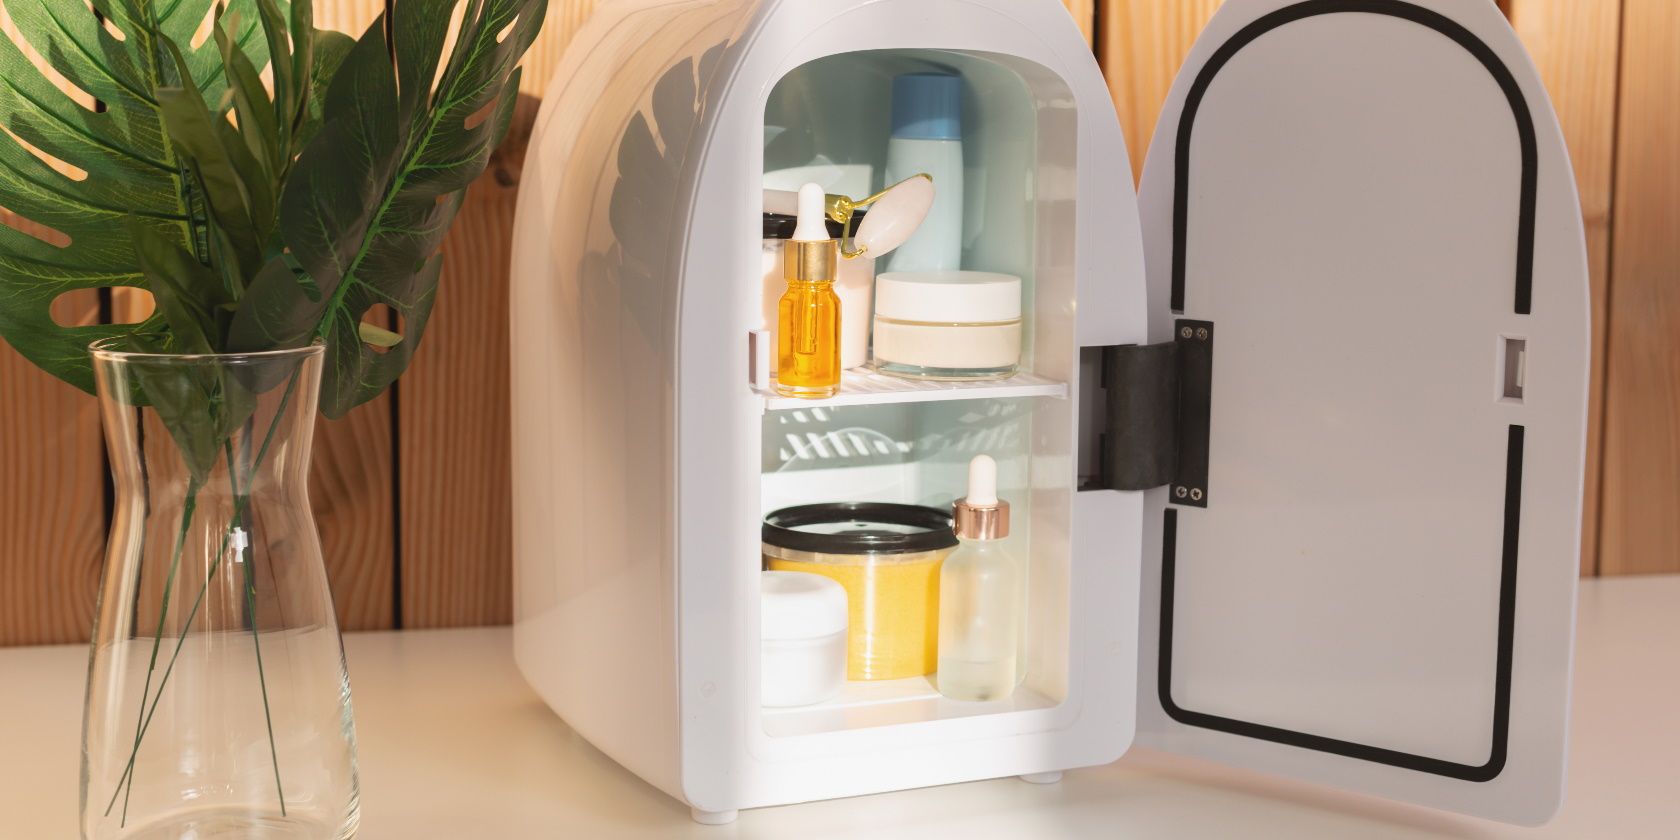 The Marble Cosmetics Fridge  Smart Skincare Storage To Keep Your Beauty  Products Fresh